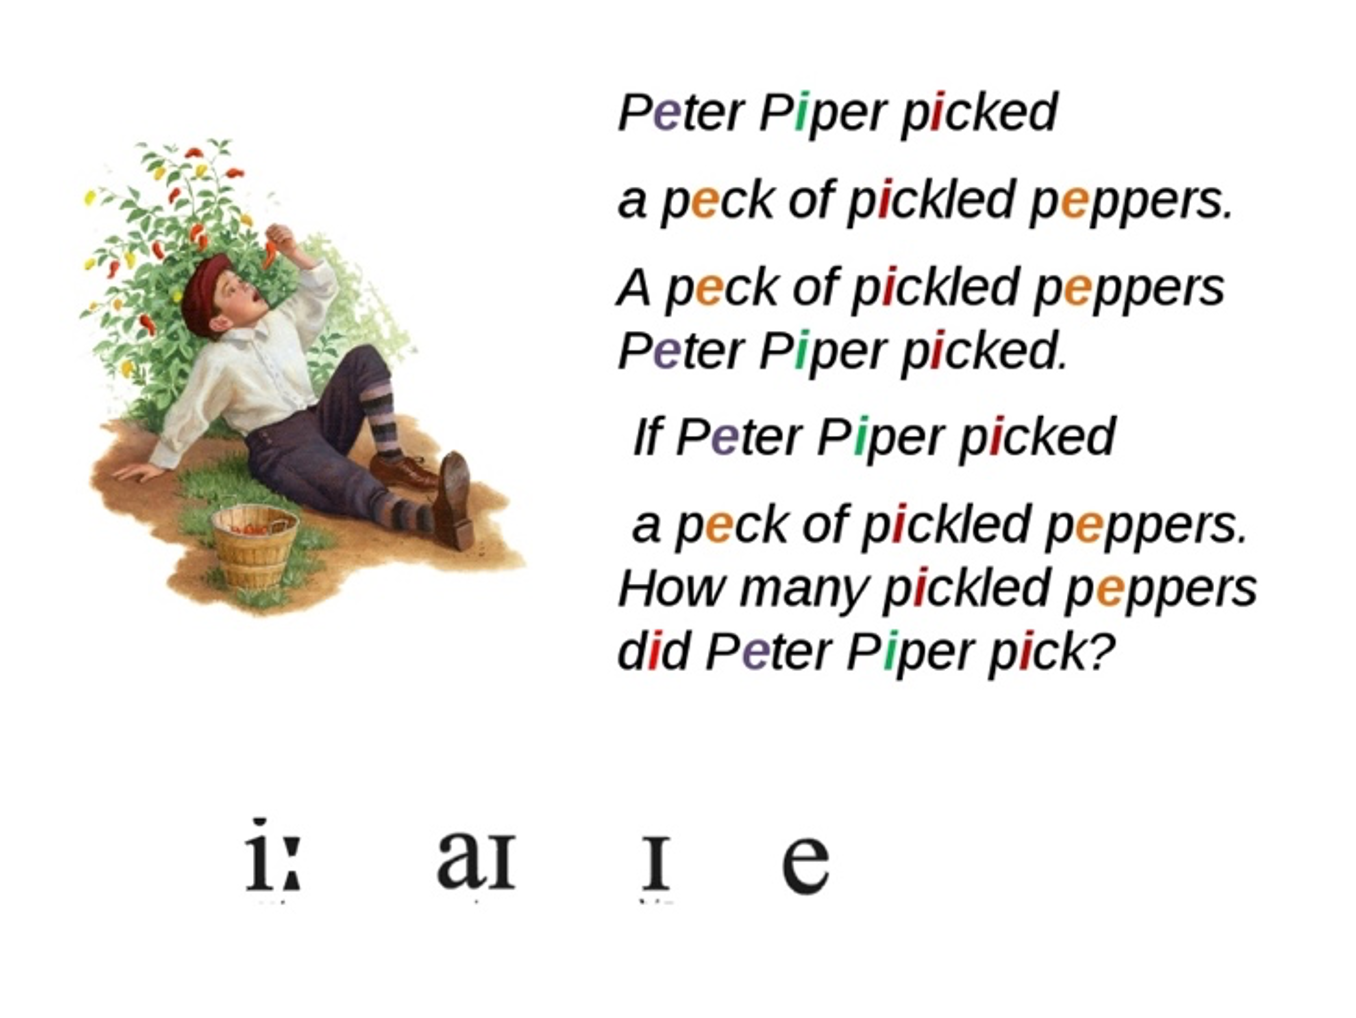 Peter picked pepper. Peter Piper picked a Peck of Pickled Peppers скороговорка. Питер Пайпер скороговорка на английском. Скороговорка на английском Peter Piper. Скороговорки на английском.